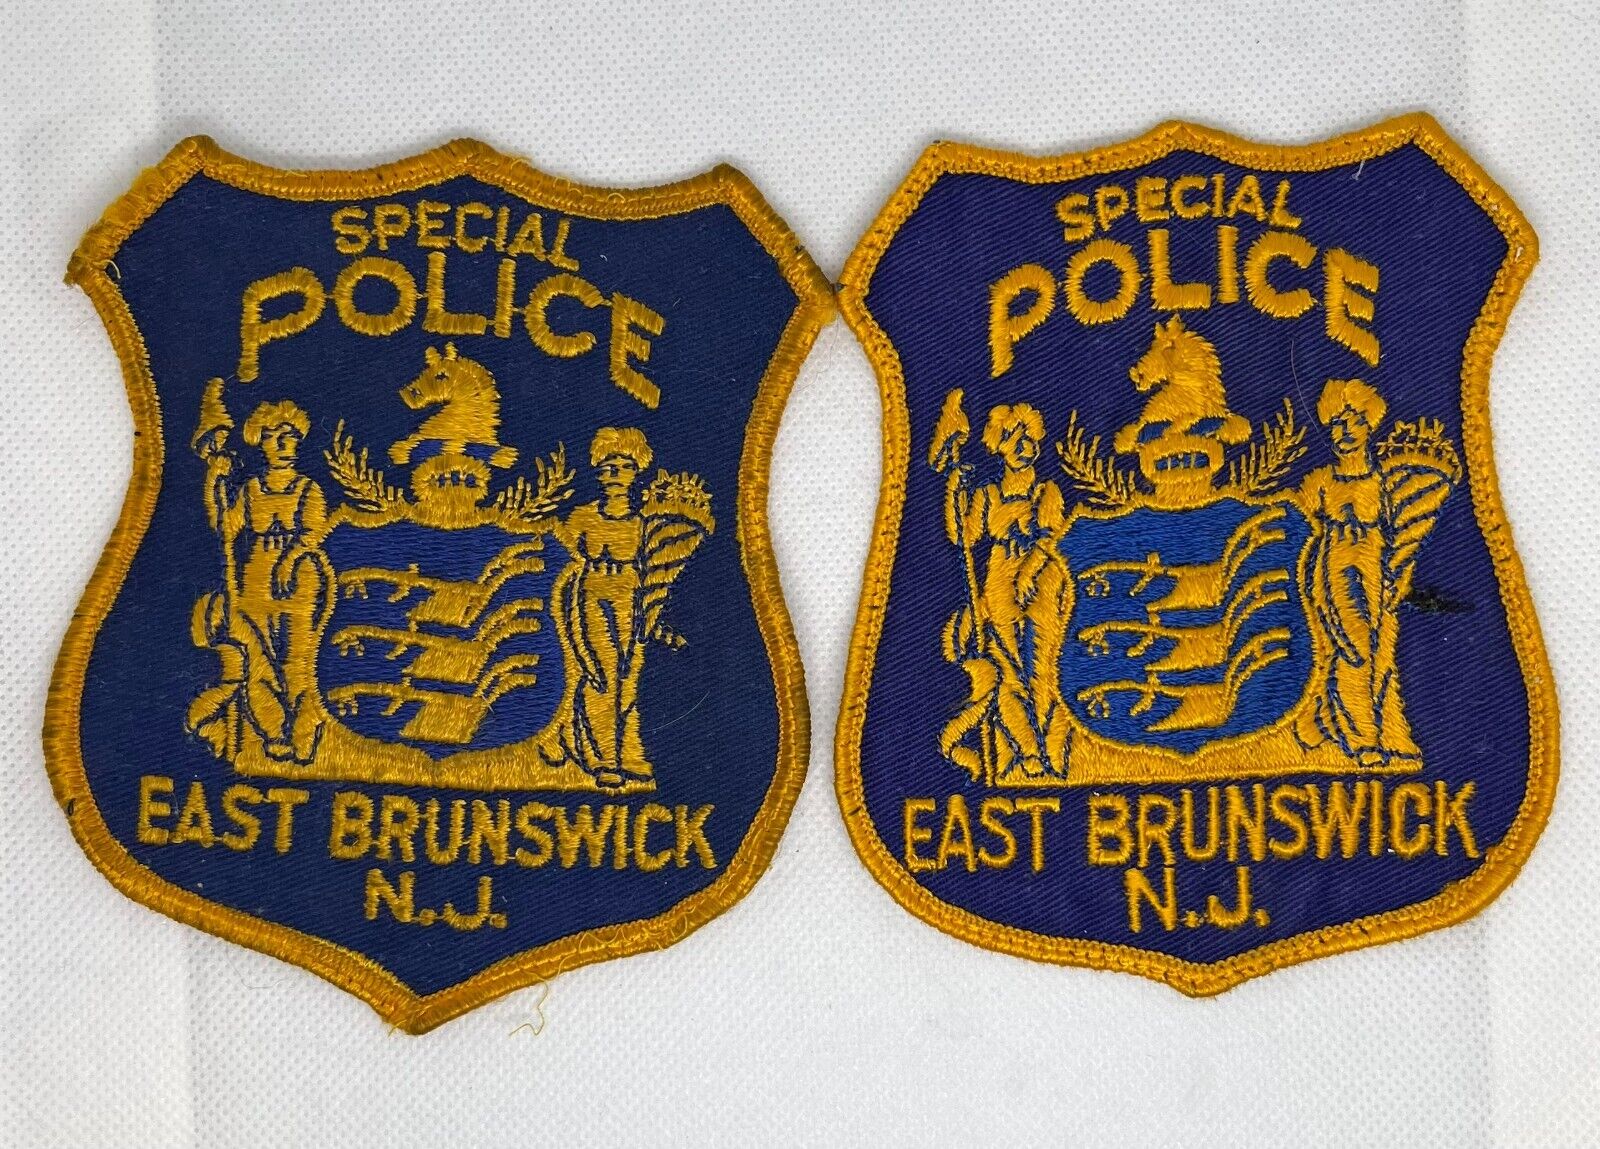 Lot of two NEW JERSEY, EAST BRUNSWICK SPECIAL POLICE VINTAGE PATCHES